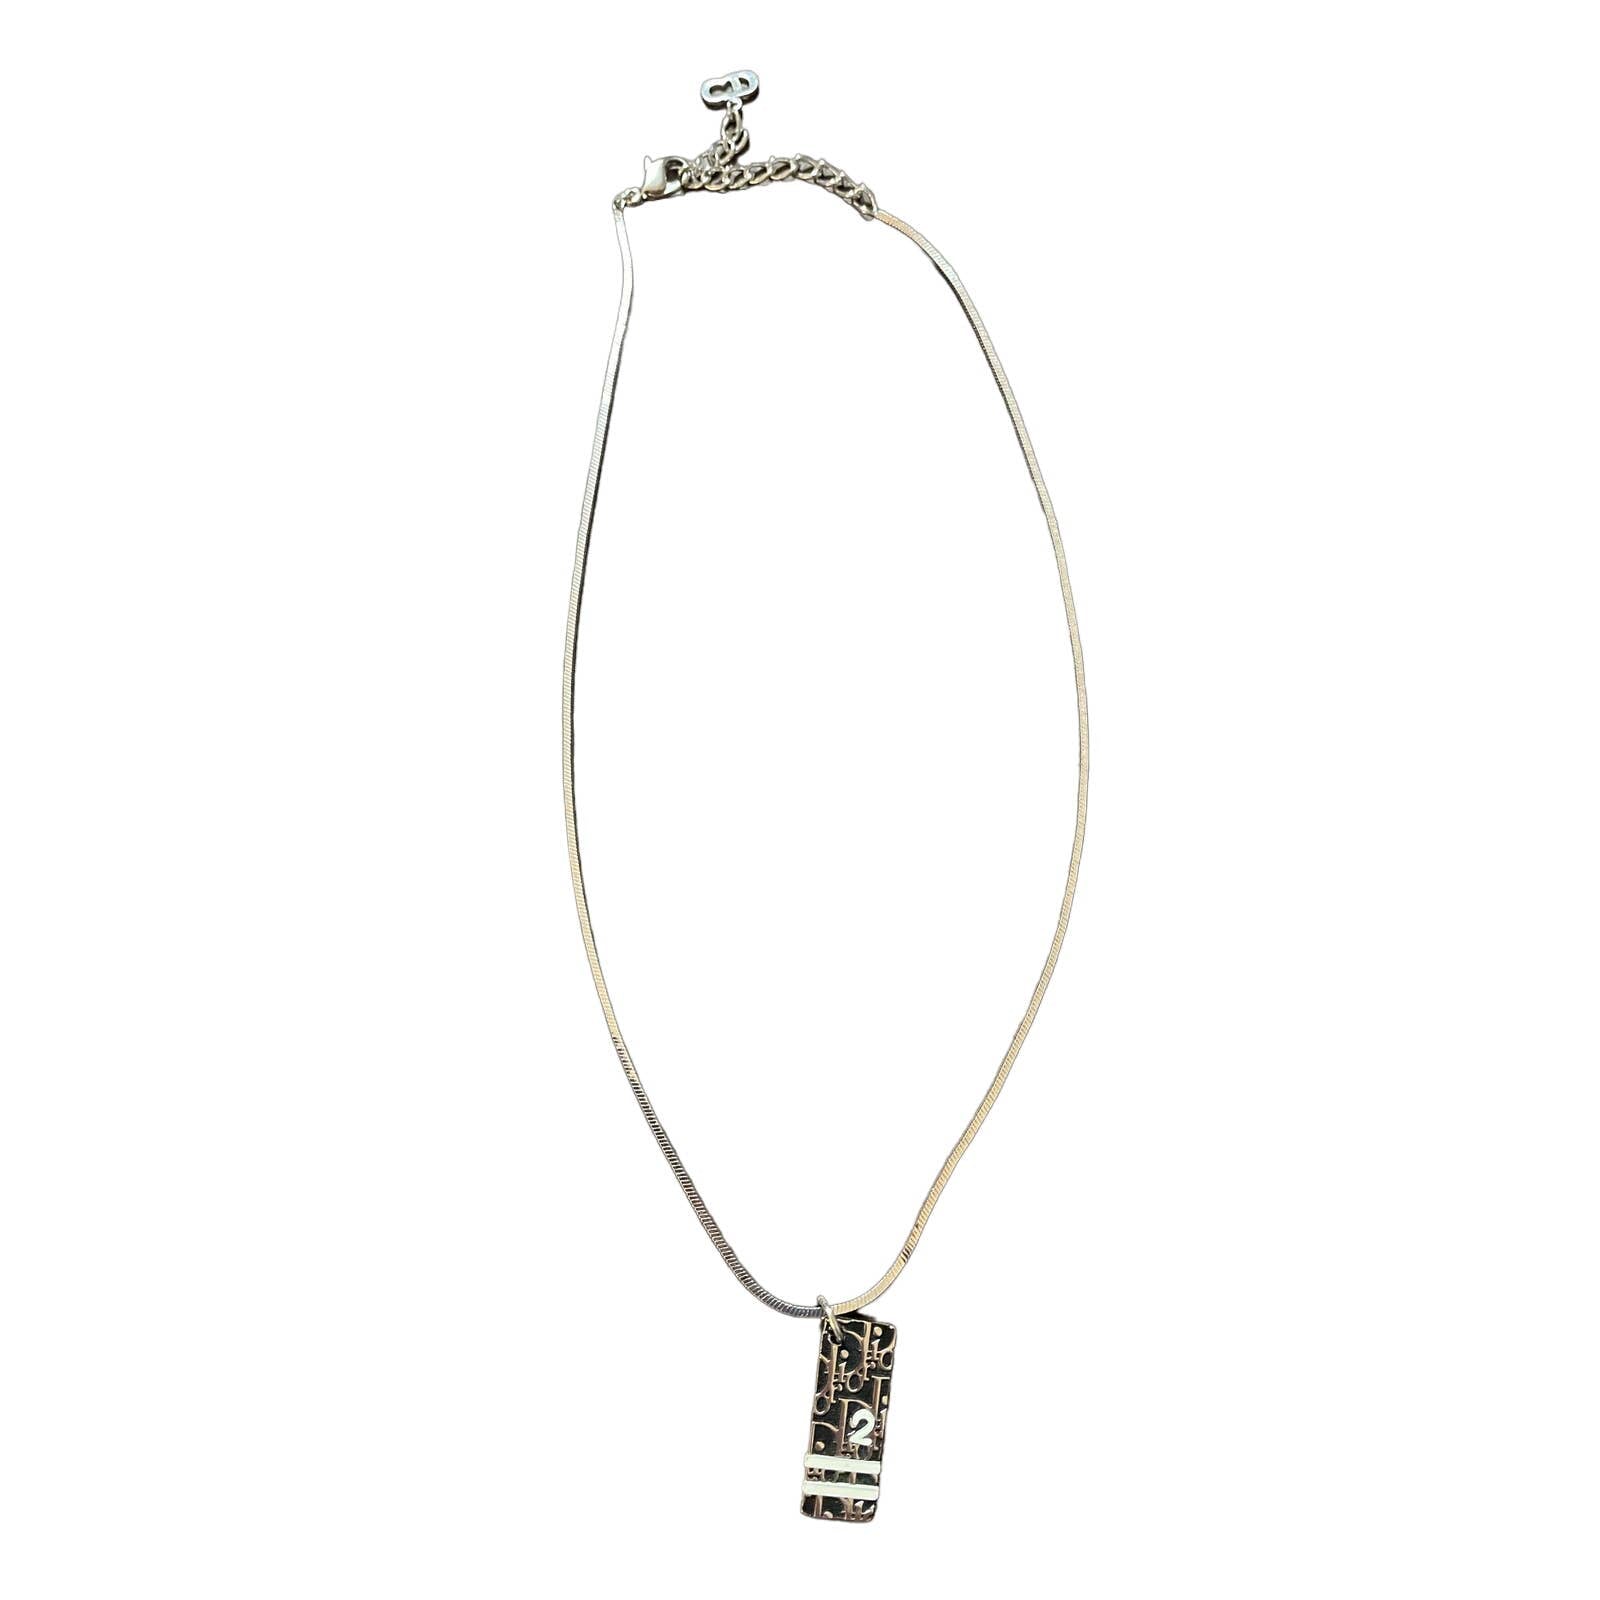 Dior Trotter Necklace - Le Look